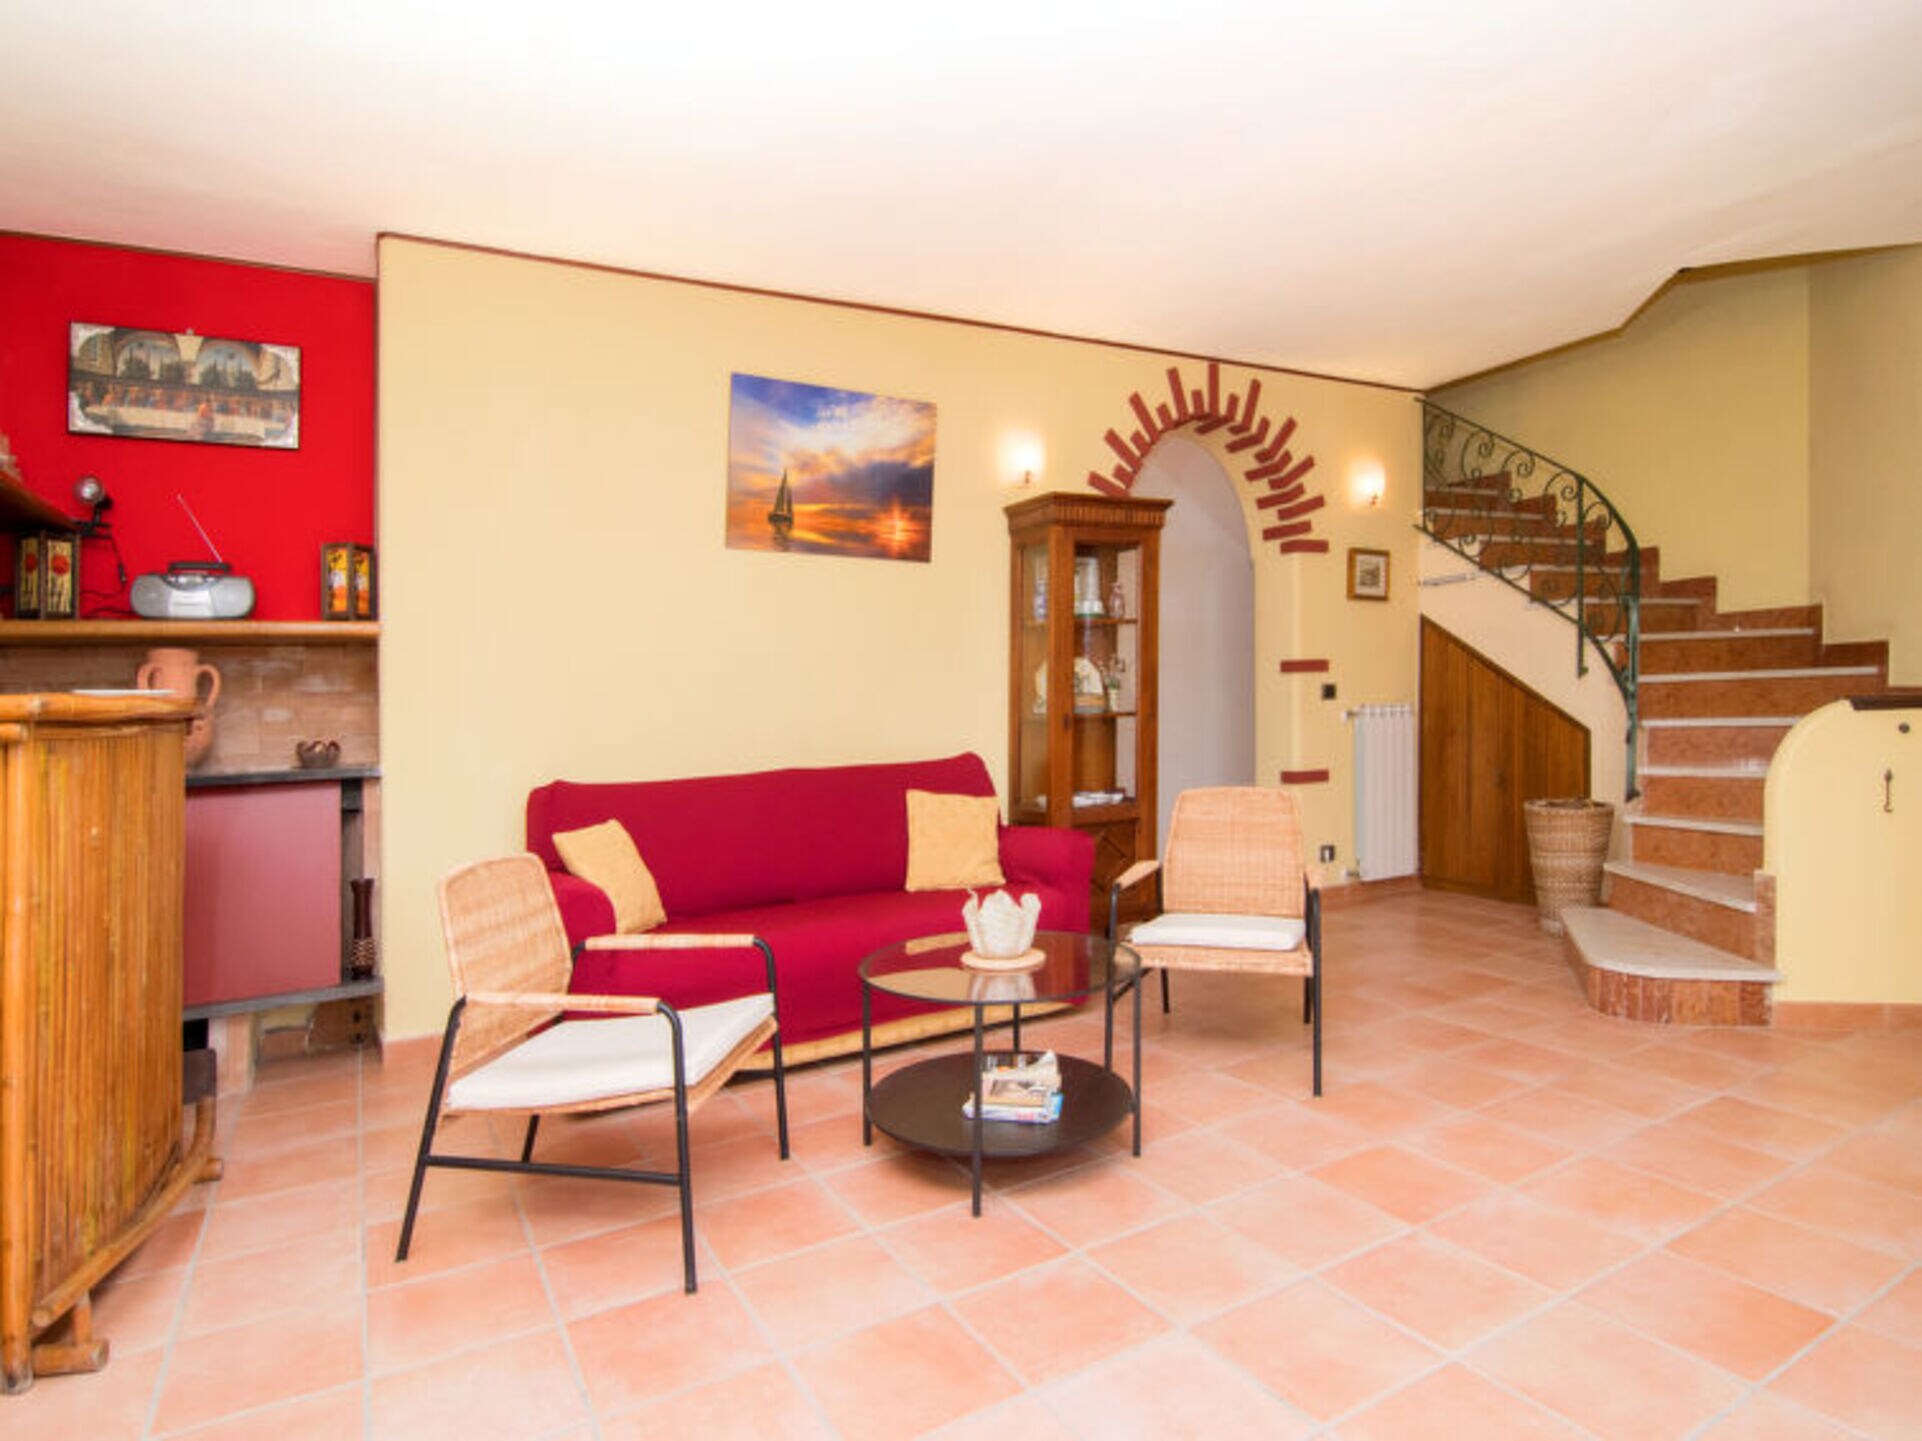 Property Image 2 - Property Manager Villa with First Class Amenities, Naples & Sorrentino Peninsula Villa 1003